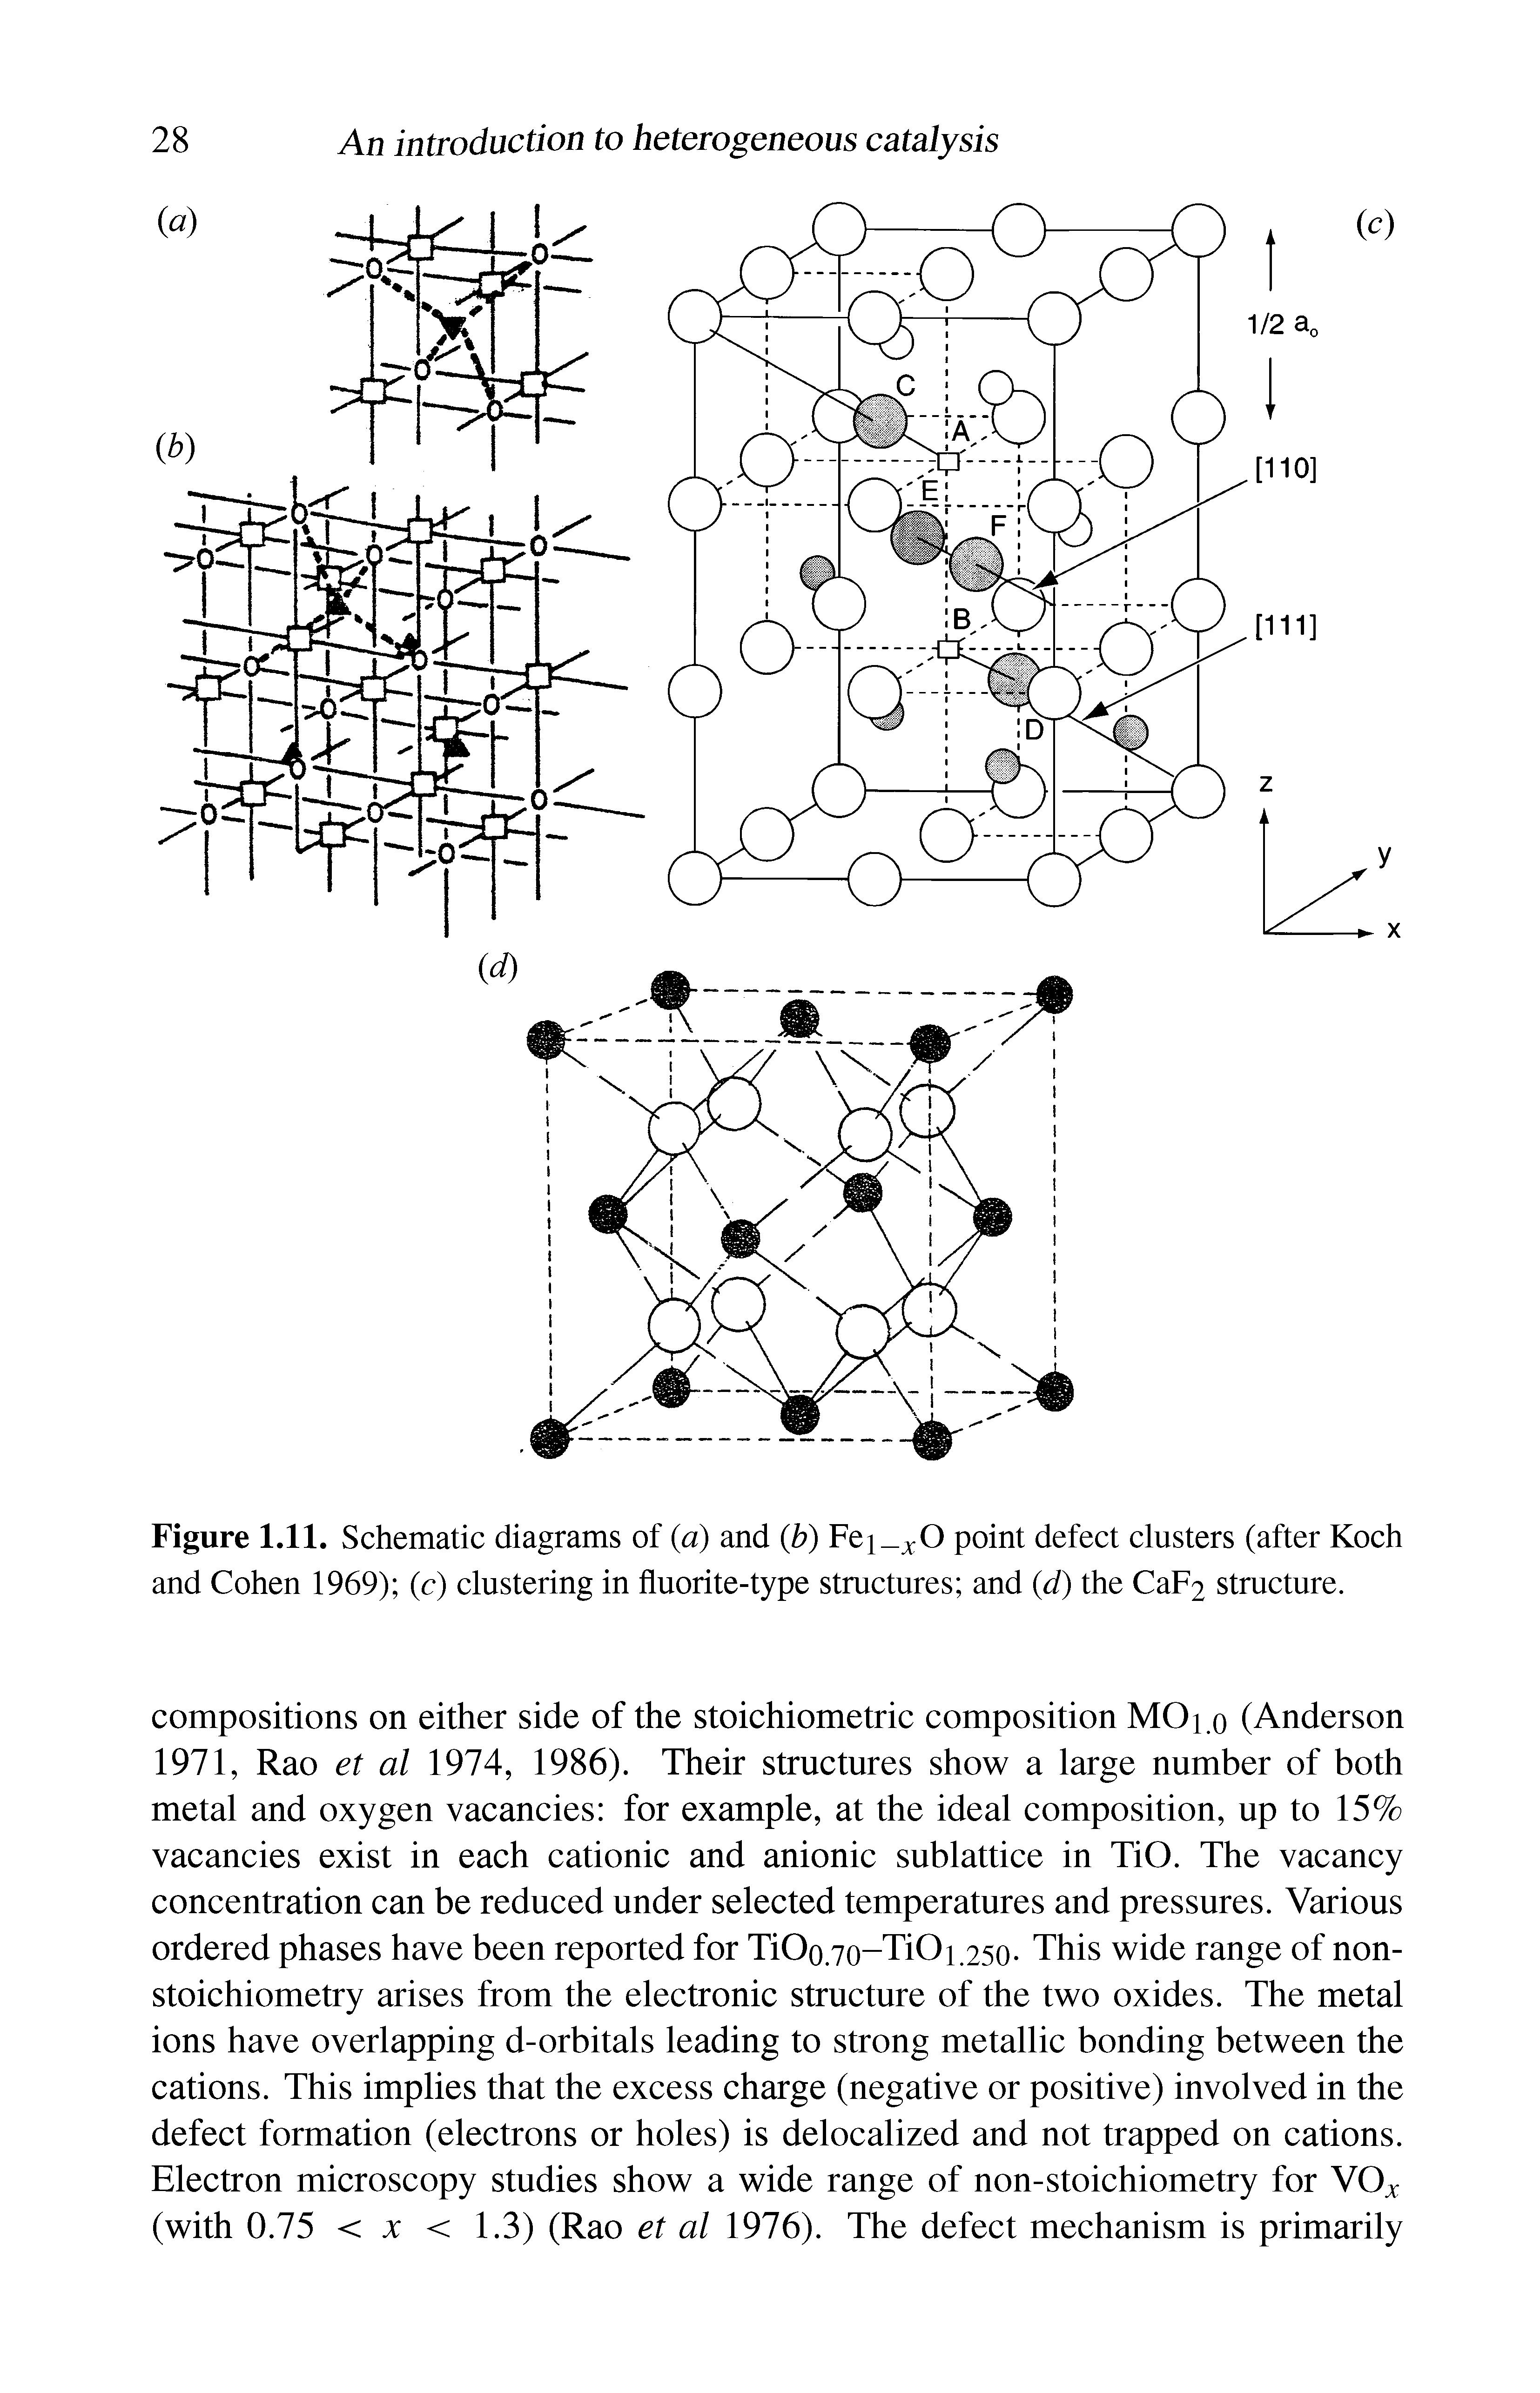 Figure 1.11. Schematic diagrams of (a) and (b) Fei j O point defect clusters (after Koch and Cohen 1969) (c) clustering in fluorite-type structures and (d) the Cap2 structure.